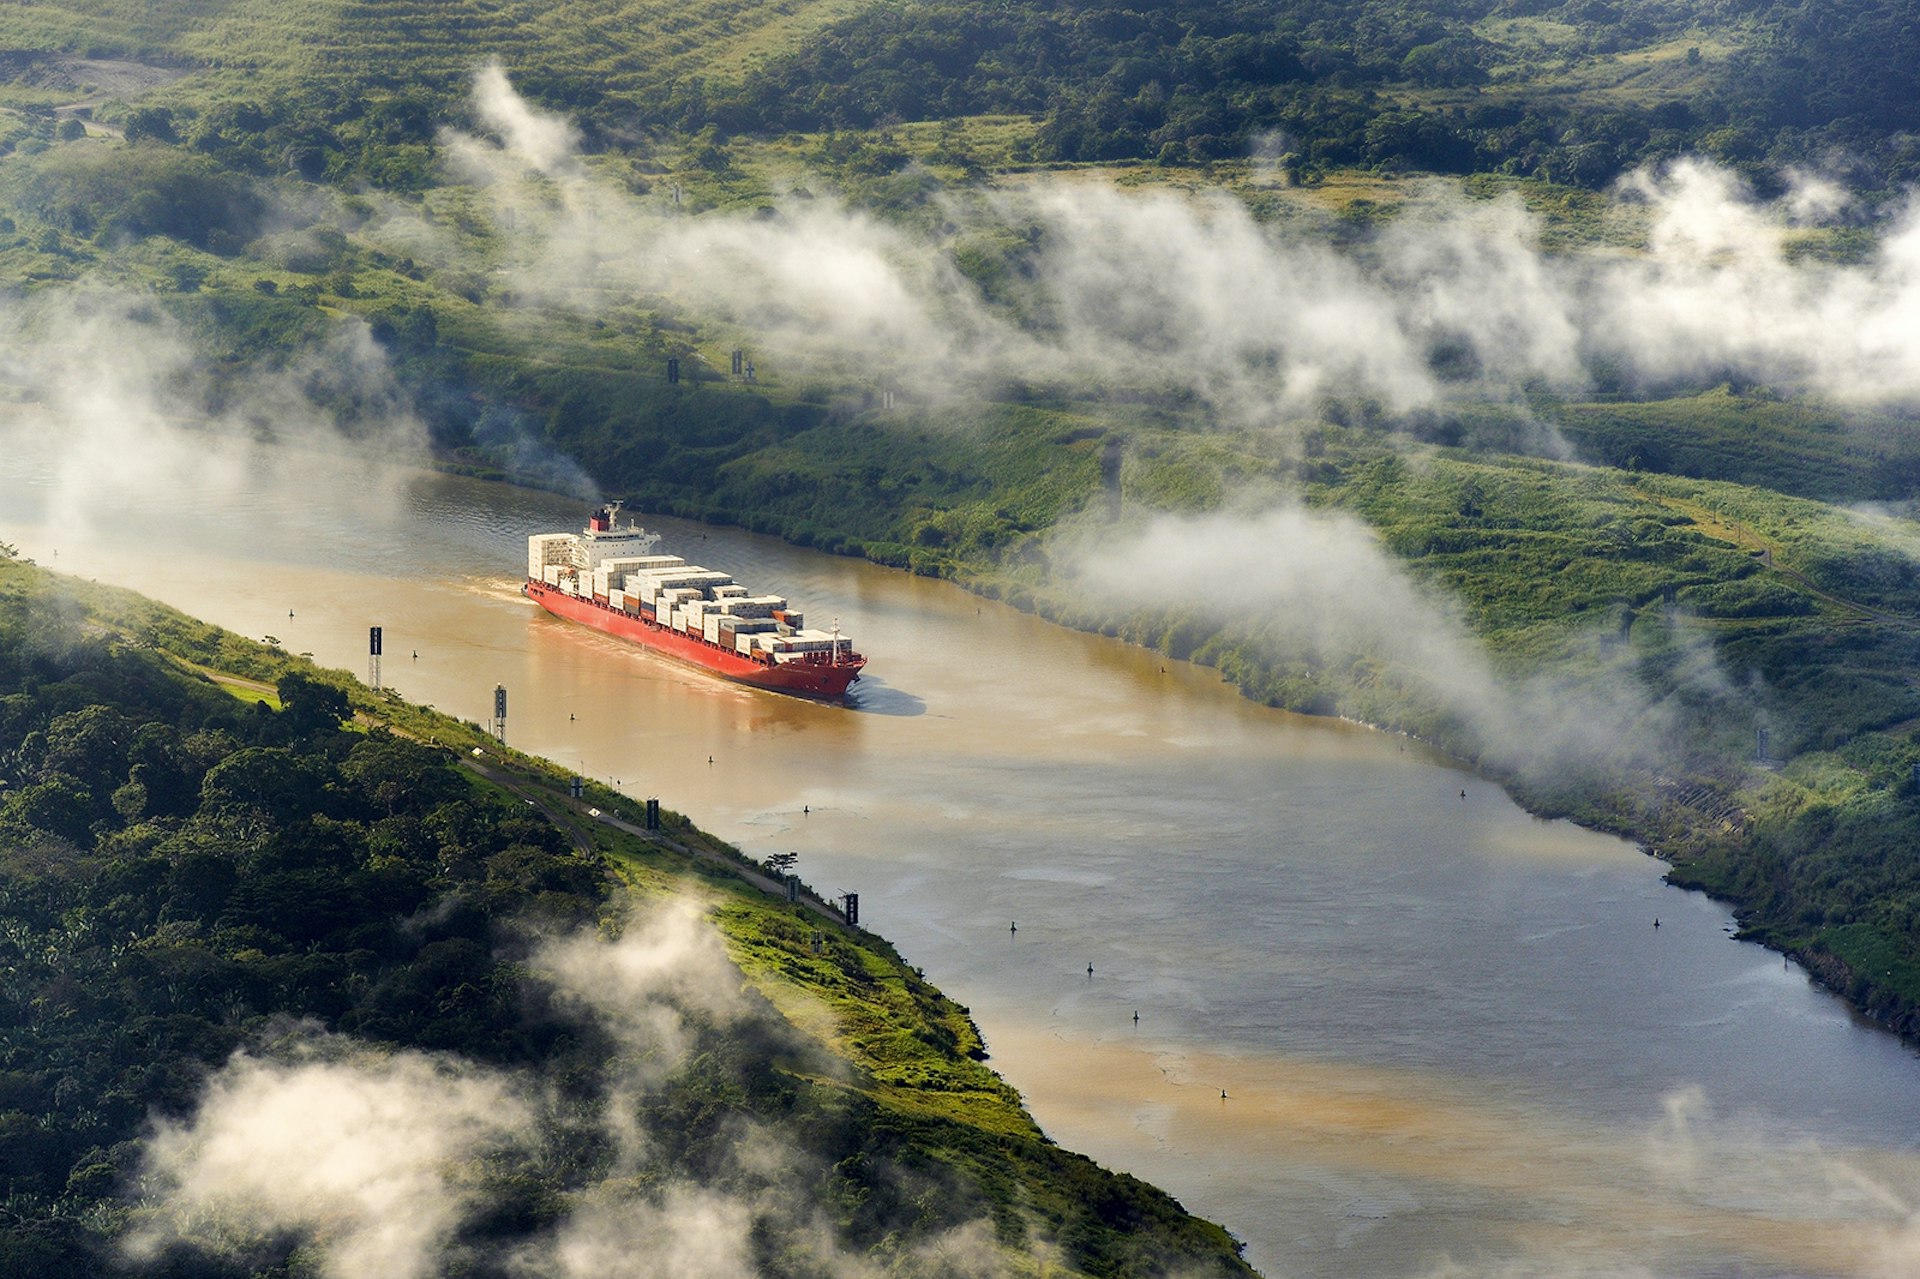 Features - Panama, Panama Canal, a Panamax container cargo uses the Gaillard cut (or Culebra cut) between the Pedro Miguel locks on the Pacific side and the Chagres river leading to Gatun Lake (aerial view)